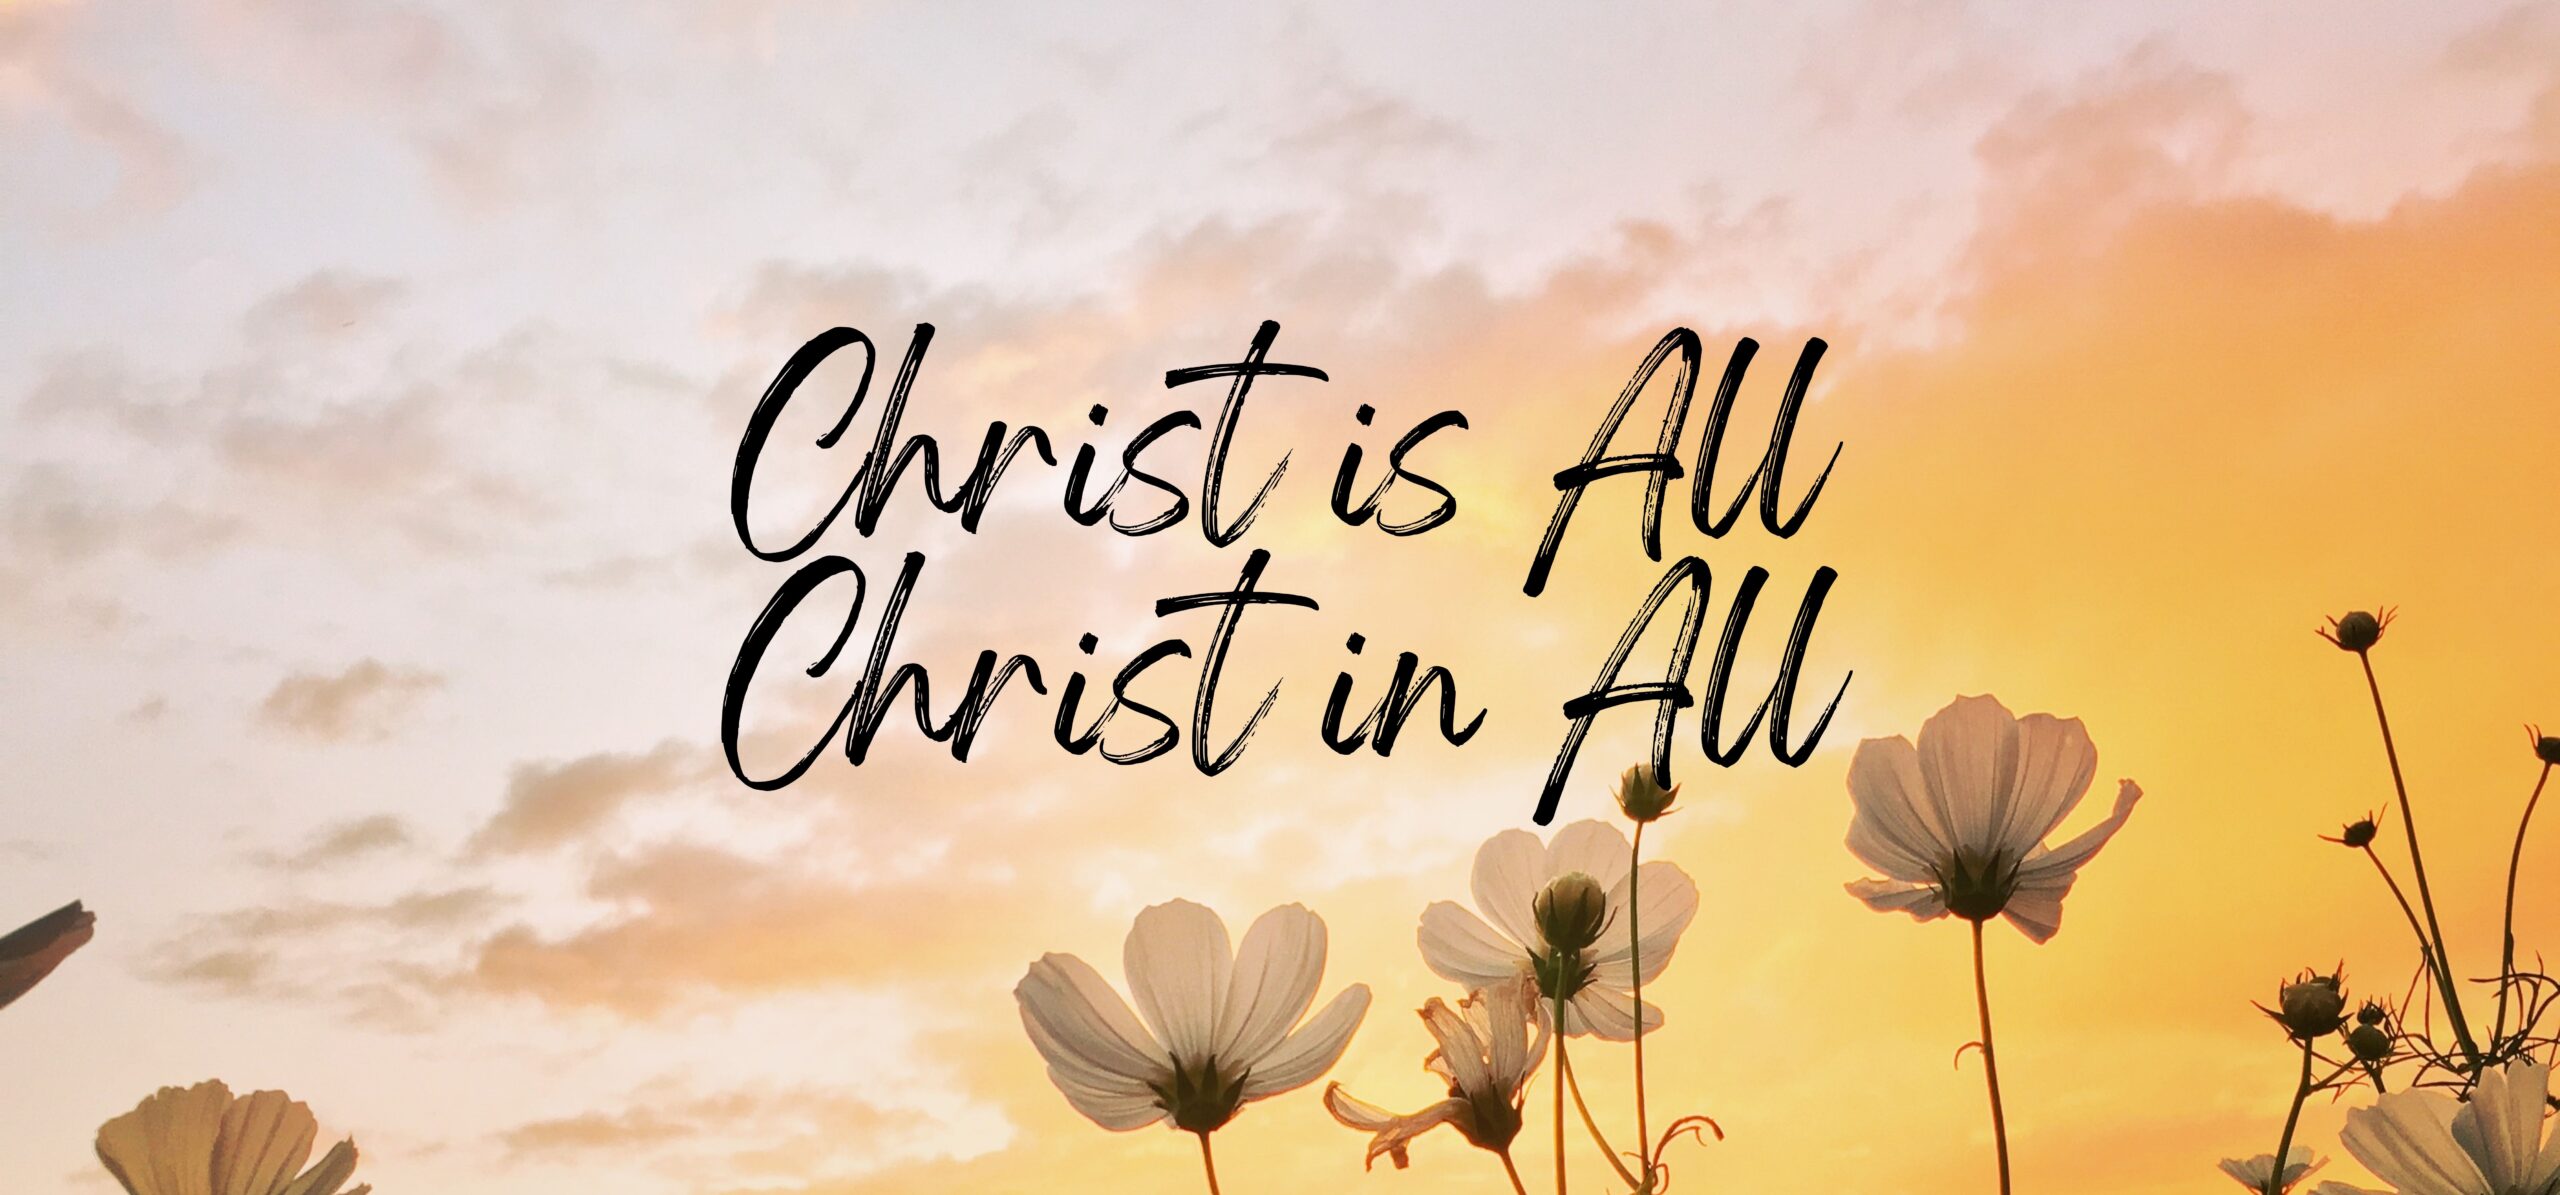 Christ in All Things